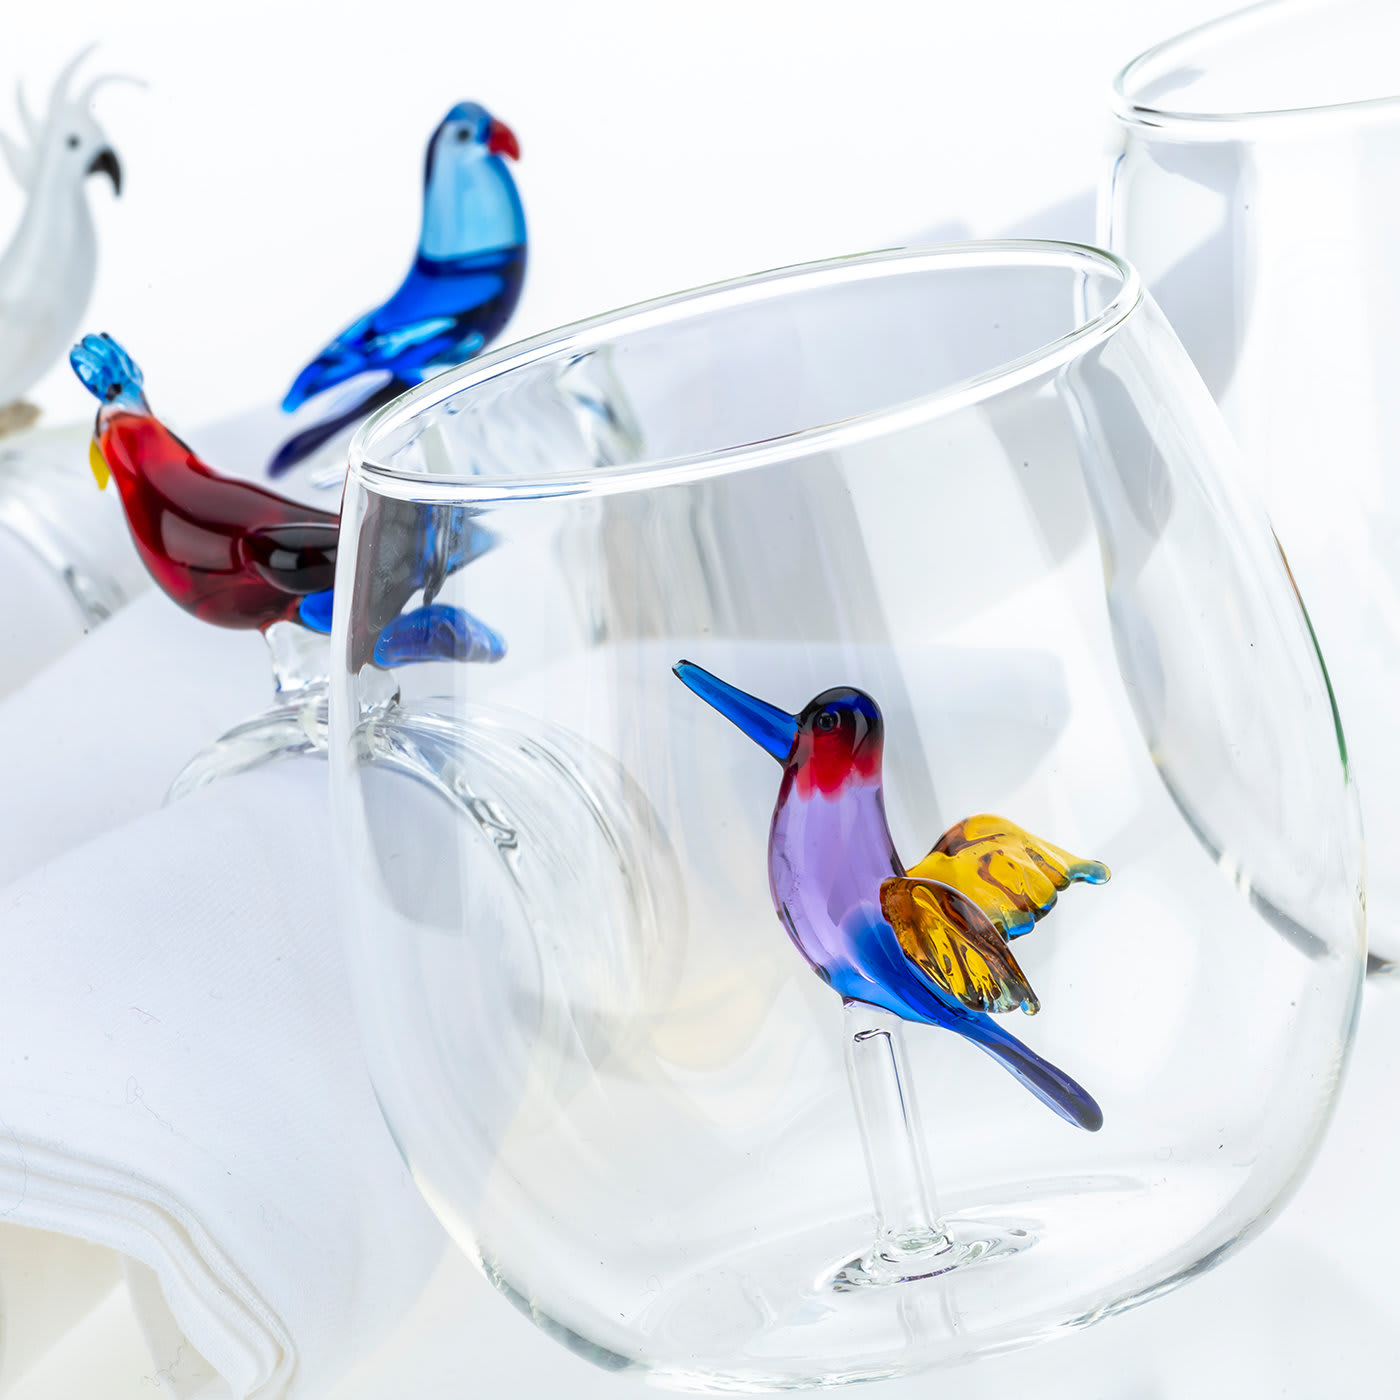 Set of 6 Tropical Bird Glasses and Peacock Pitcher - Casarialto